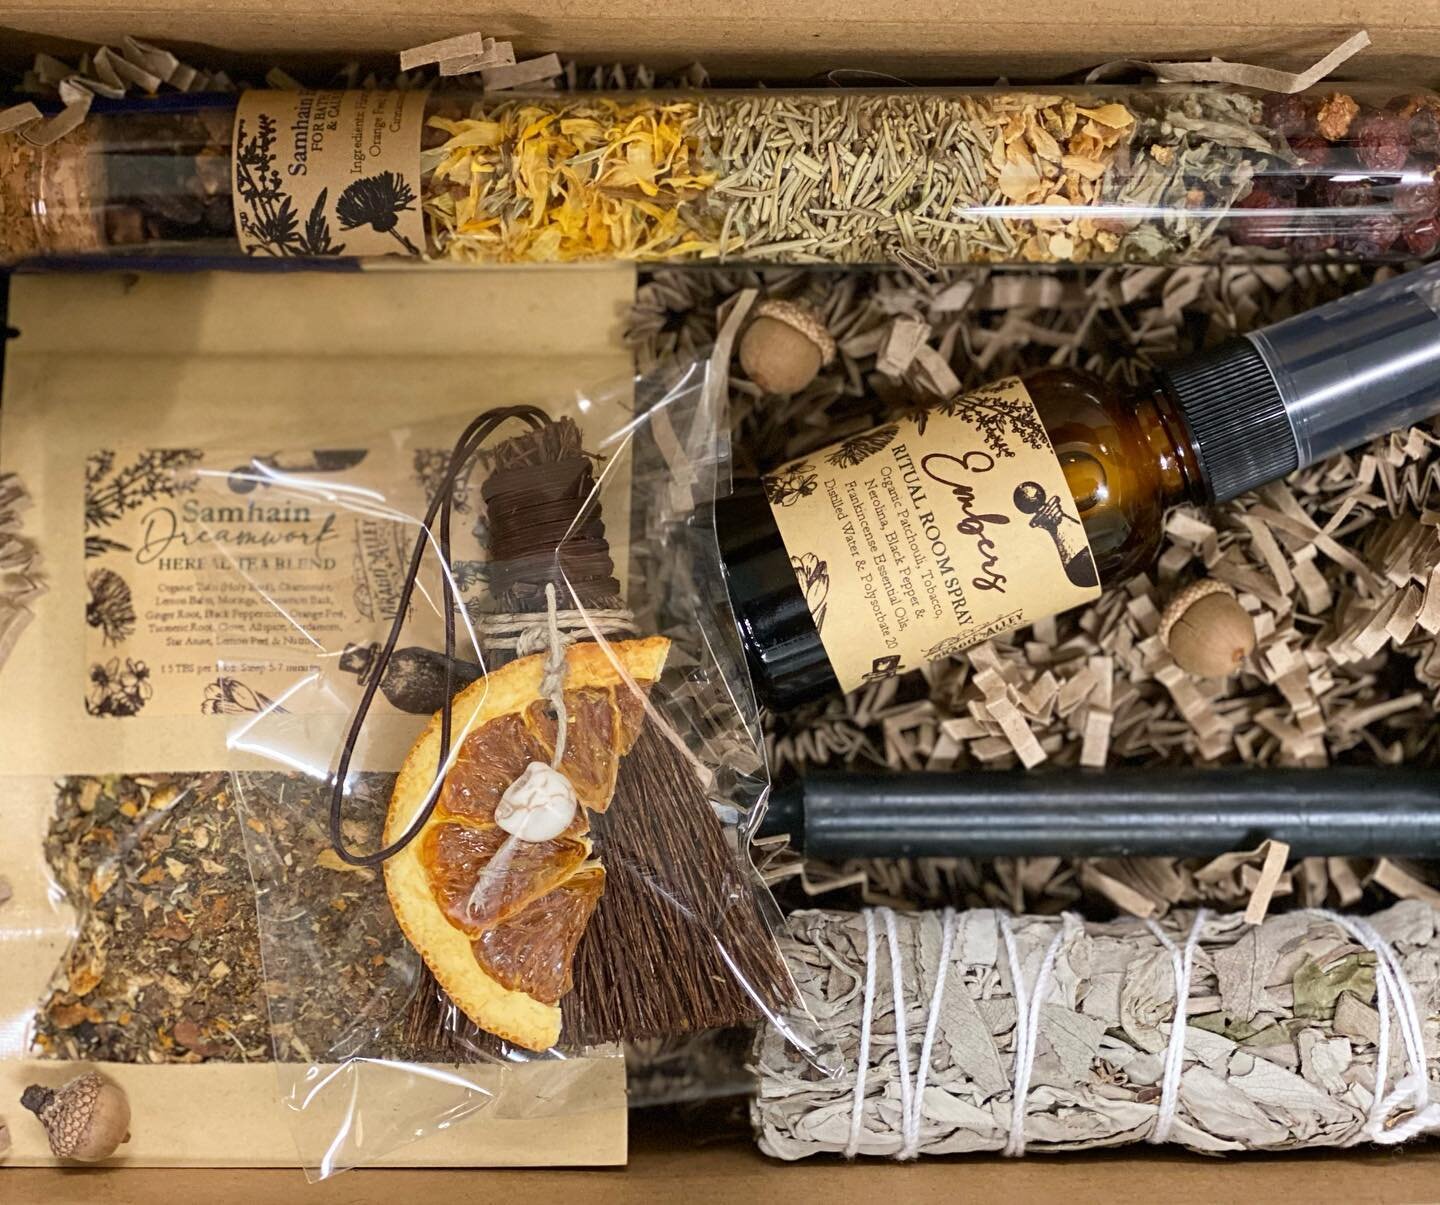 Samhain ritual boxes will be available this Sunday at the River City Witches Samhain Market! Box includes: A glass vial full of organic Samhain herbs for bath, cauldron and moon water ritual work. (Hawthorn Berries, mugwort, orange peel, Rosemary, ca